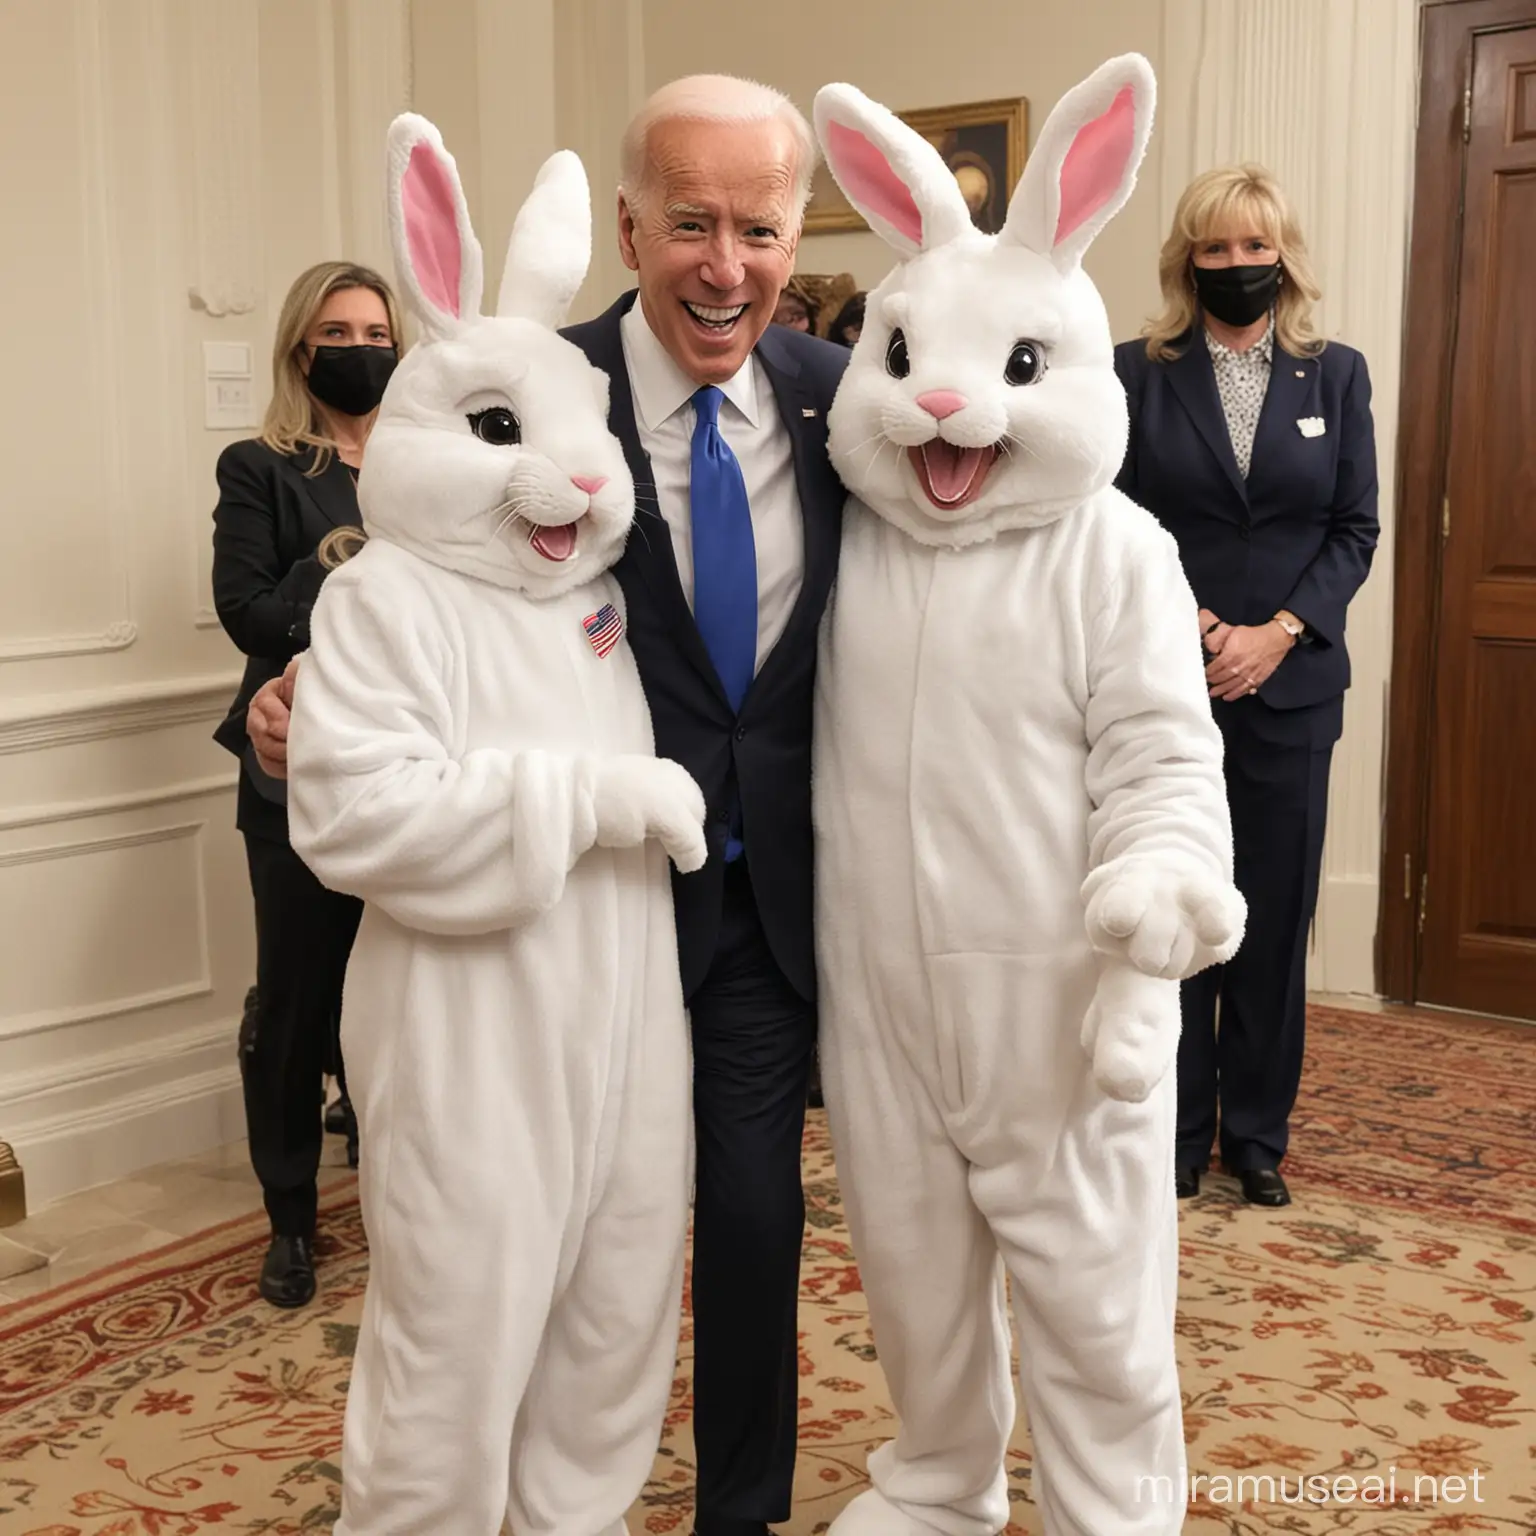 Joe Biden in Bunny Costume Playful Moment with a Political Twist